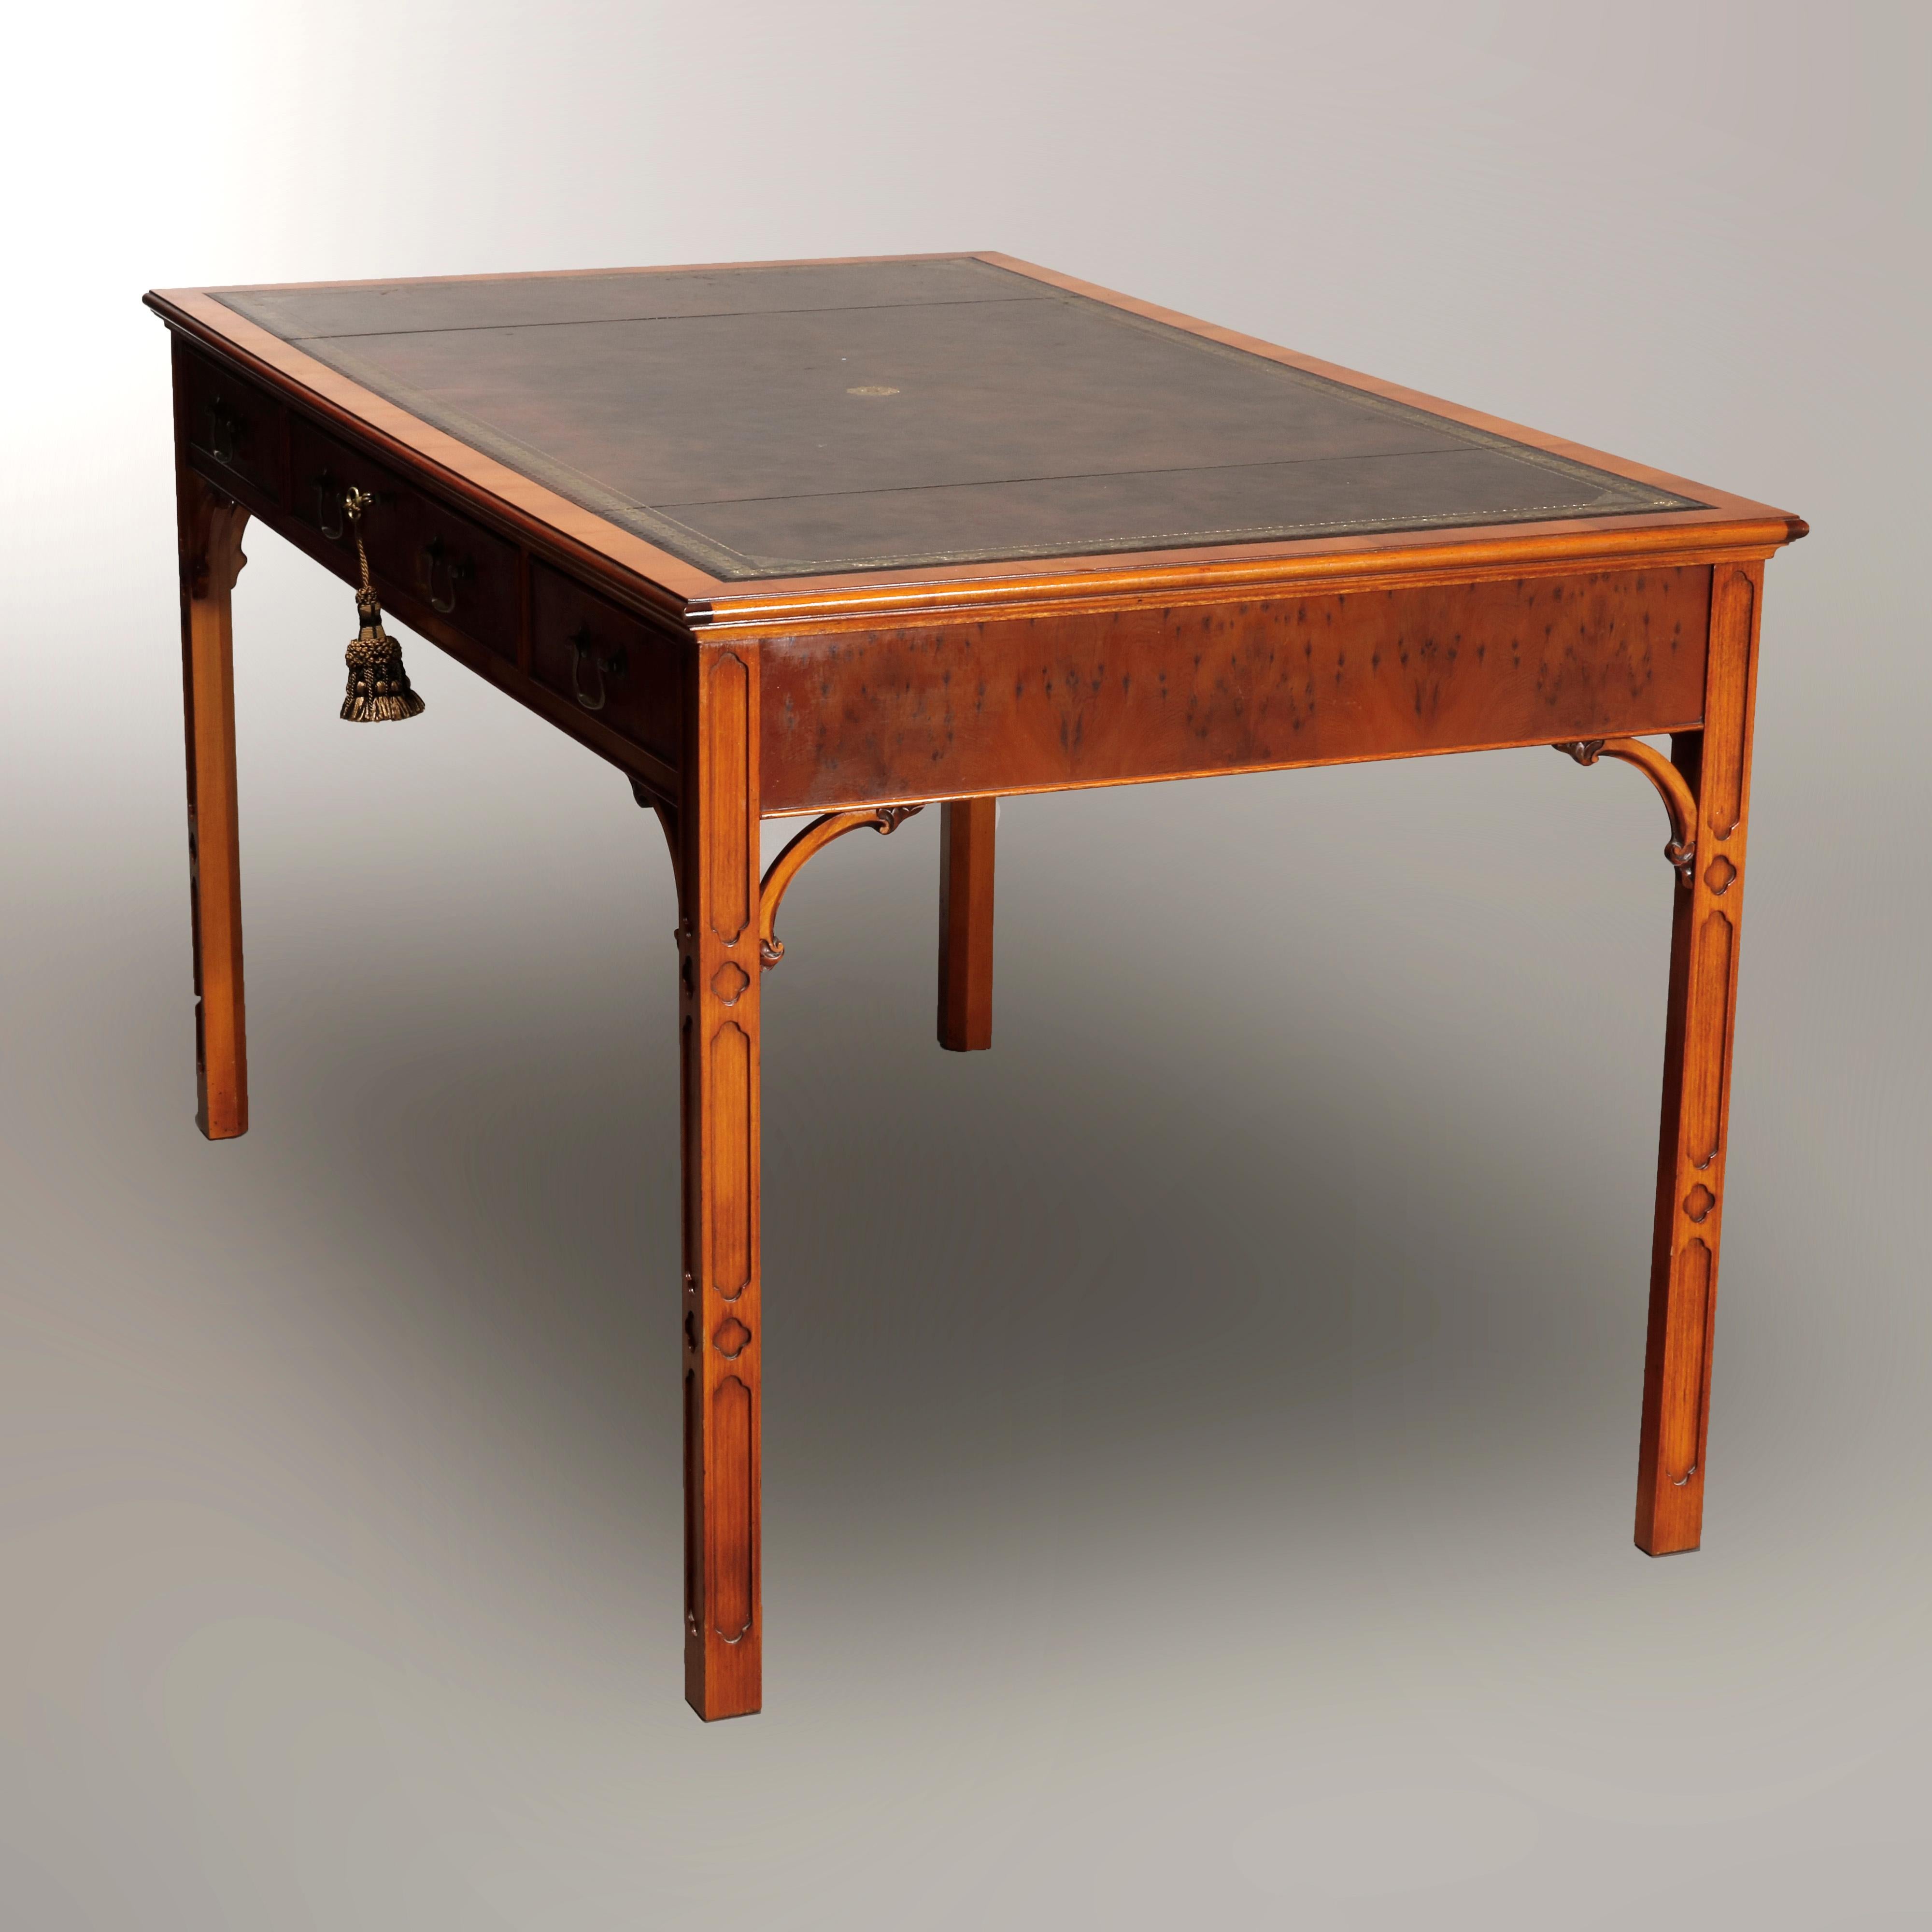 20th Century Bevan Funnell English Chinese Chippendale Mahogany & Olivewood Desk, 20th C